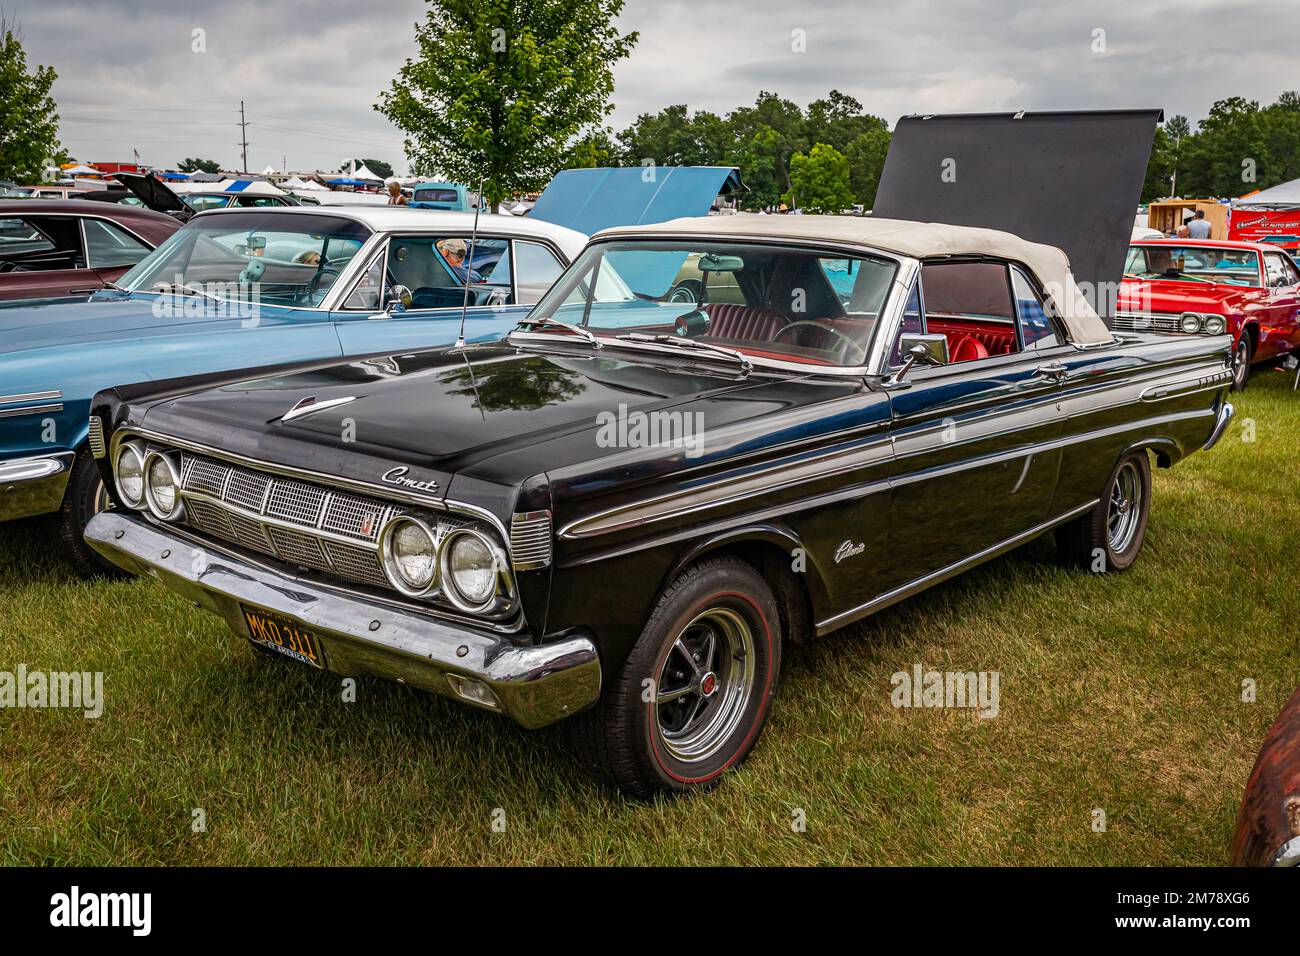 Iola, WI - July 07, 2022: High perspective front corner view of a 1964 Mercury Comet Caliente Convertible at a local car show. Stock Photo